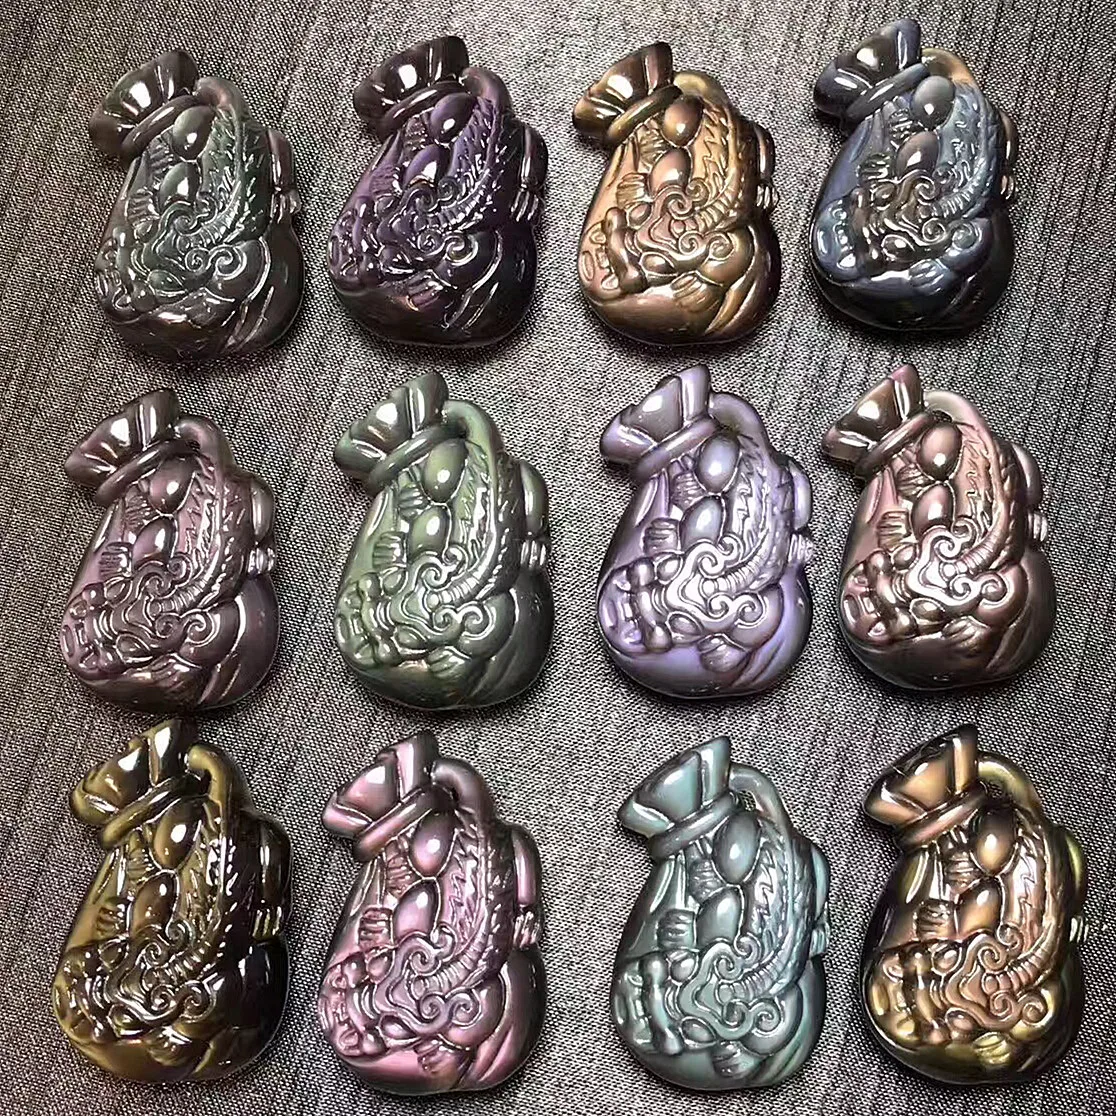 Natural Ice Rainbow Eye Black Yao Stone Purse Pendeloque Cut Carved Men And Women Fund Recruit Wealth Brave Troops Purse Pendant